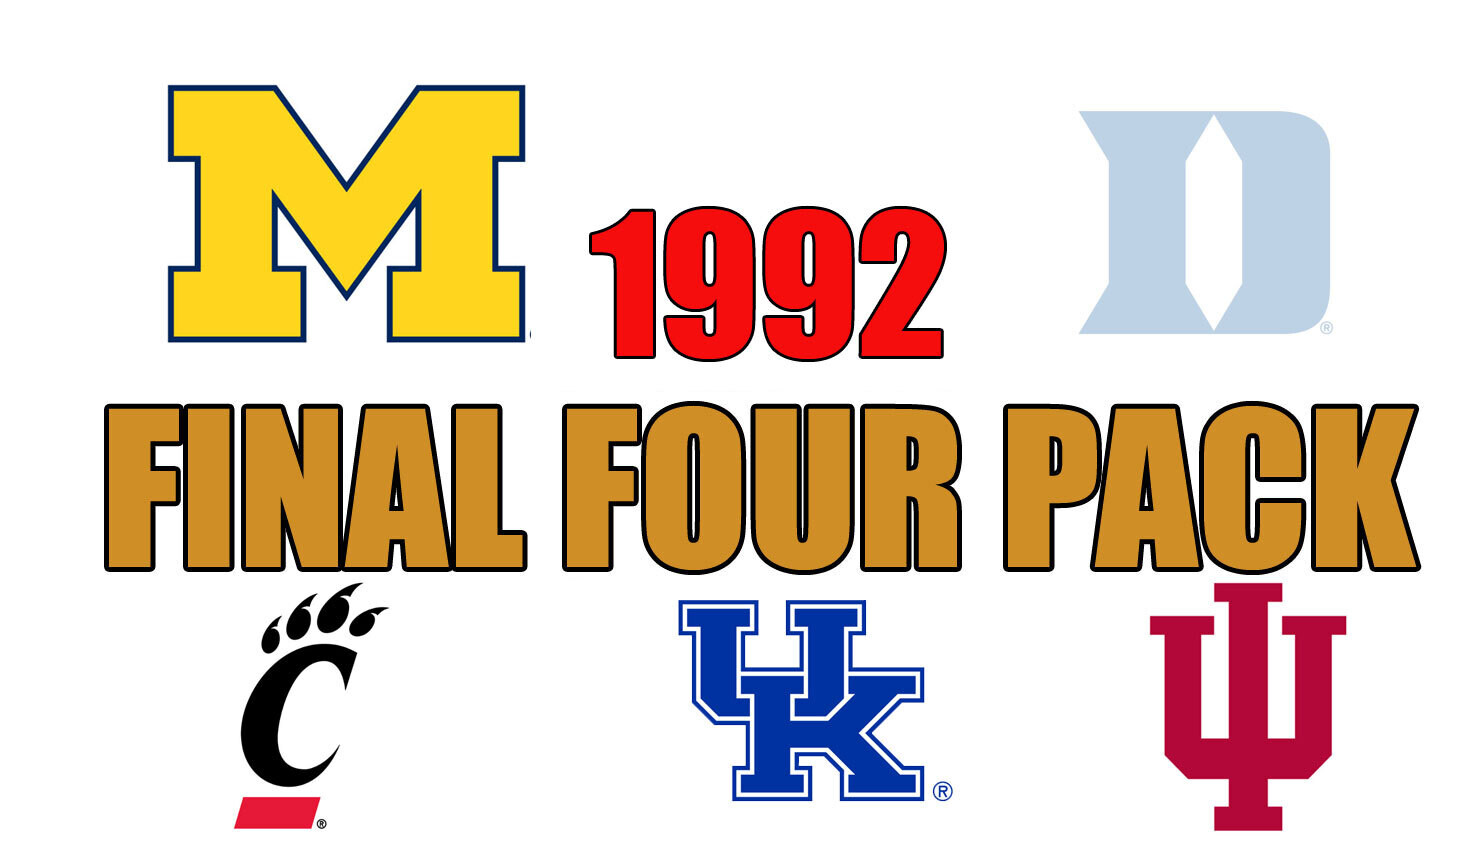 1992 Final Four Pack (BL Library)